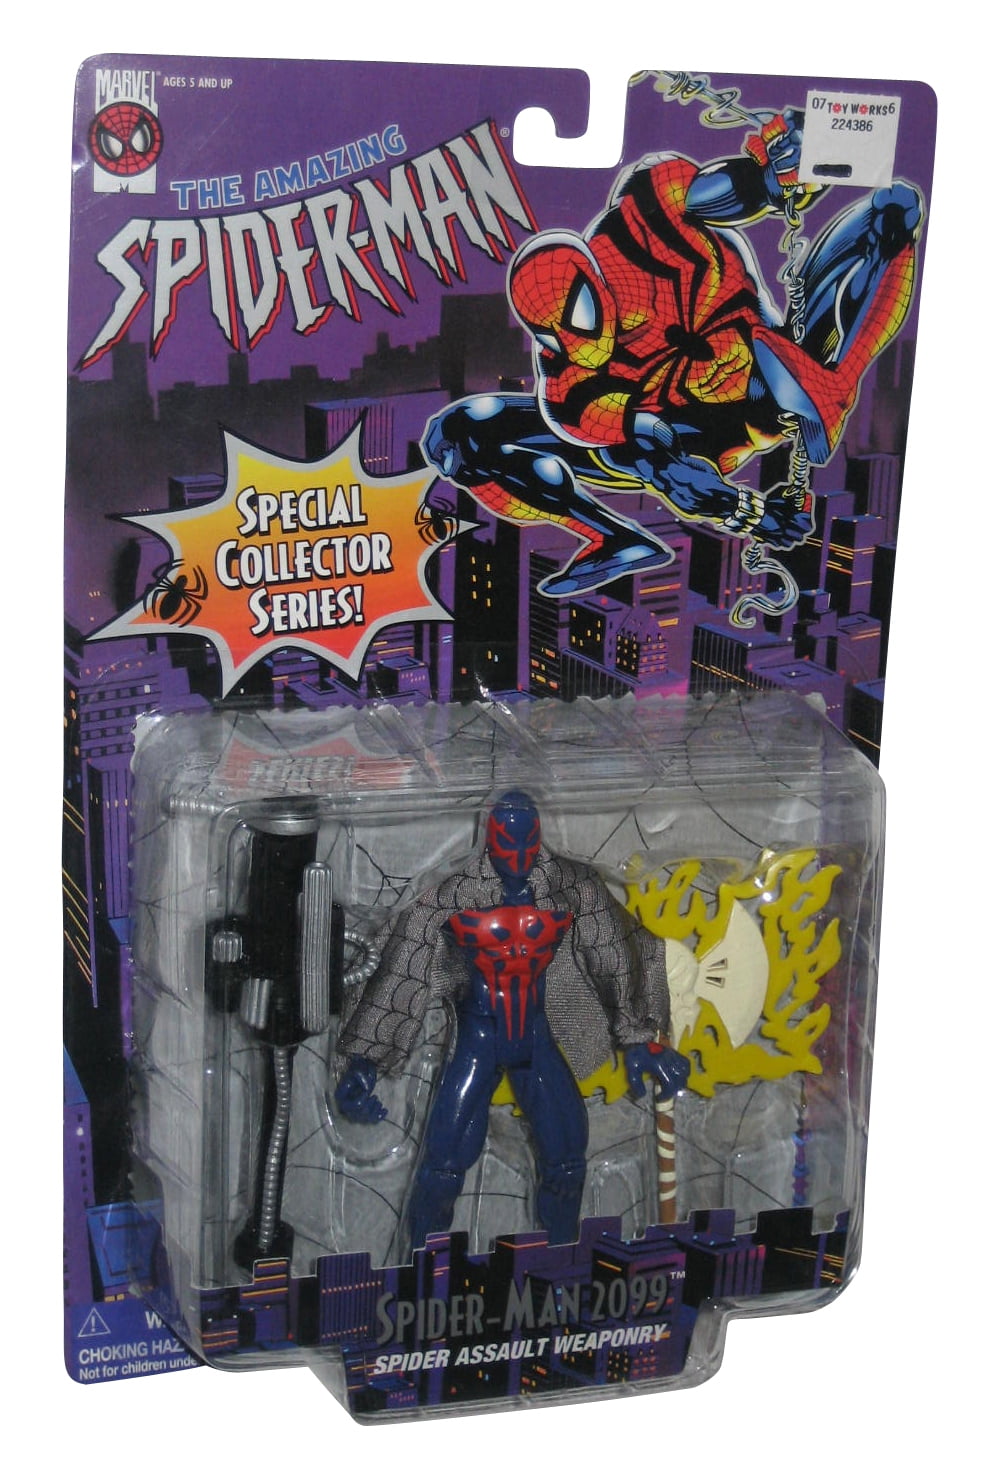 Marvel The Amazing SpiderMan 2099 Collector Series Toy